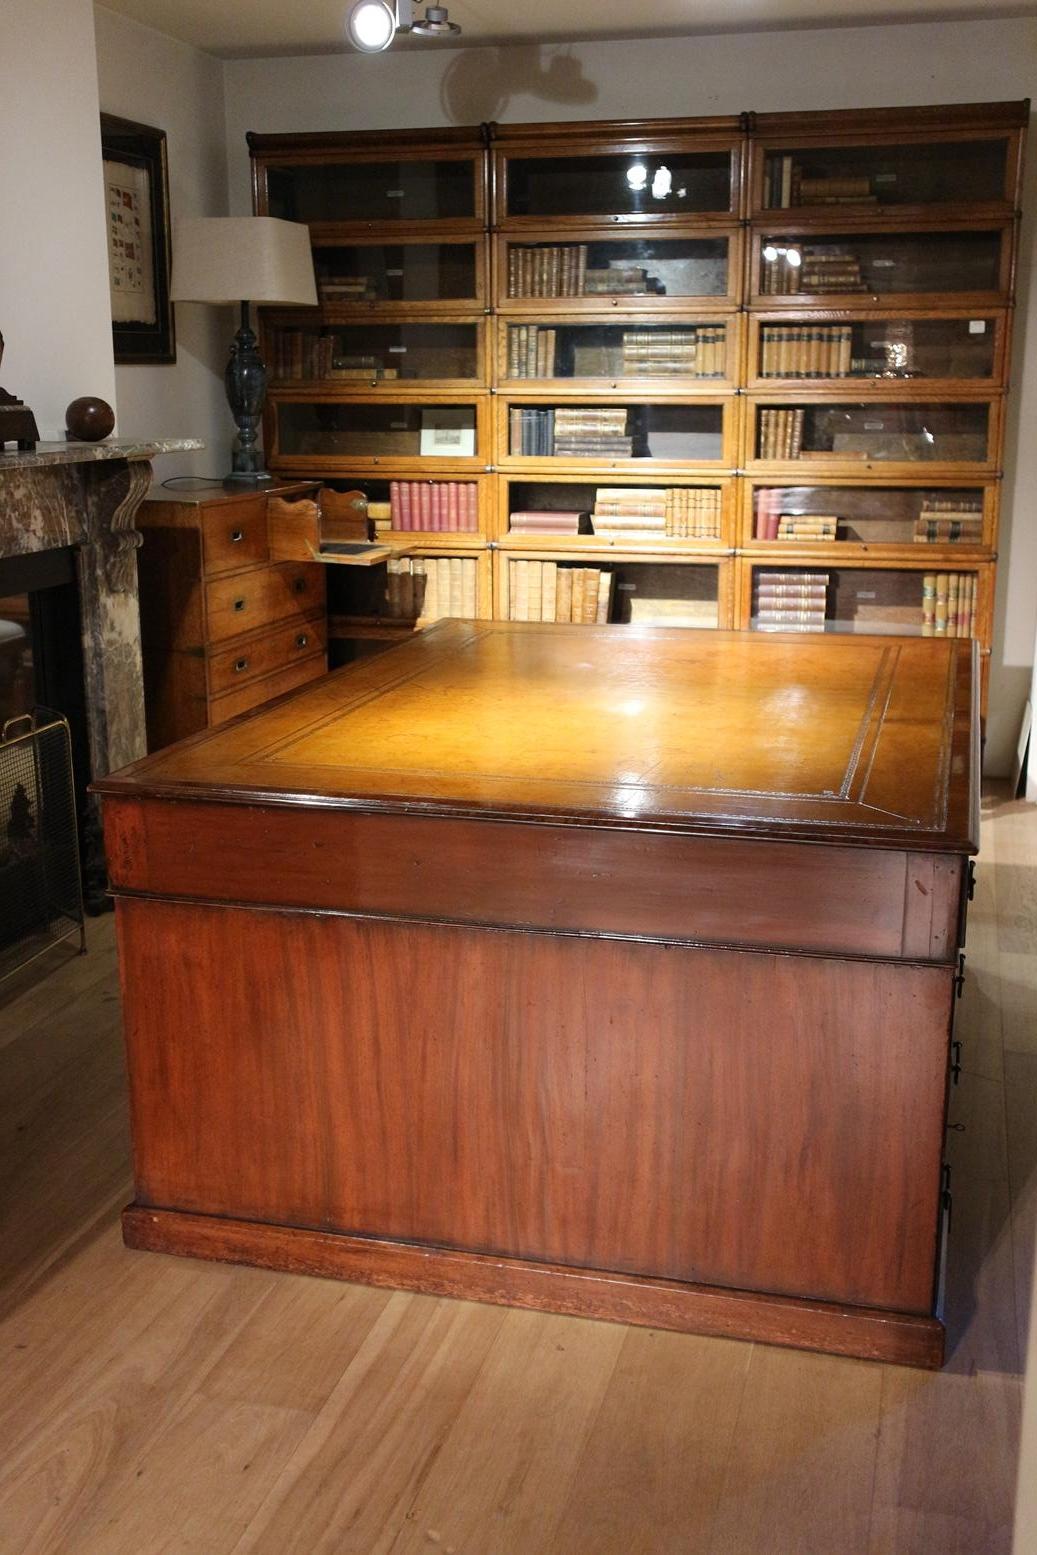 Large antique partner desk with 10 drawers on both sides. Beautiful leather tray, one-piece cowhide leather. Entire desk has a beautiful aged patina. The desks with drawers on both sides are the better versions. Drawers look nice and are practical.